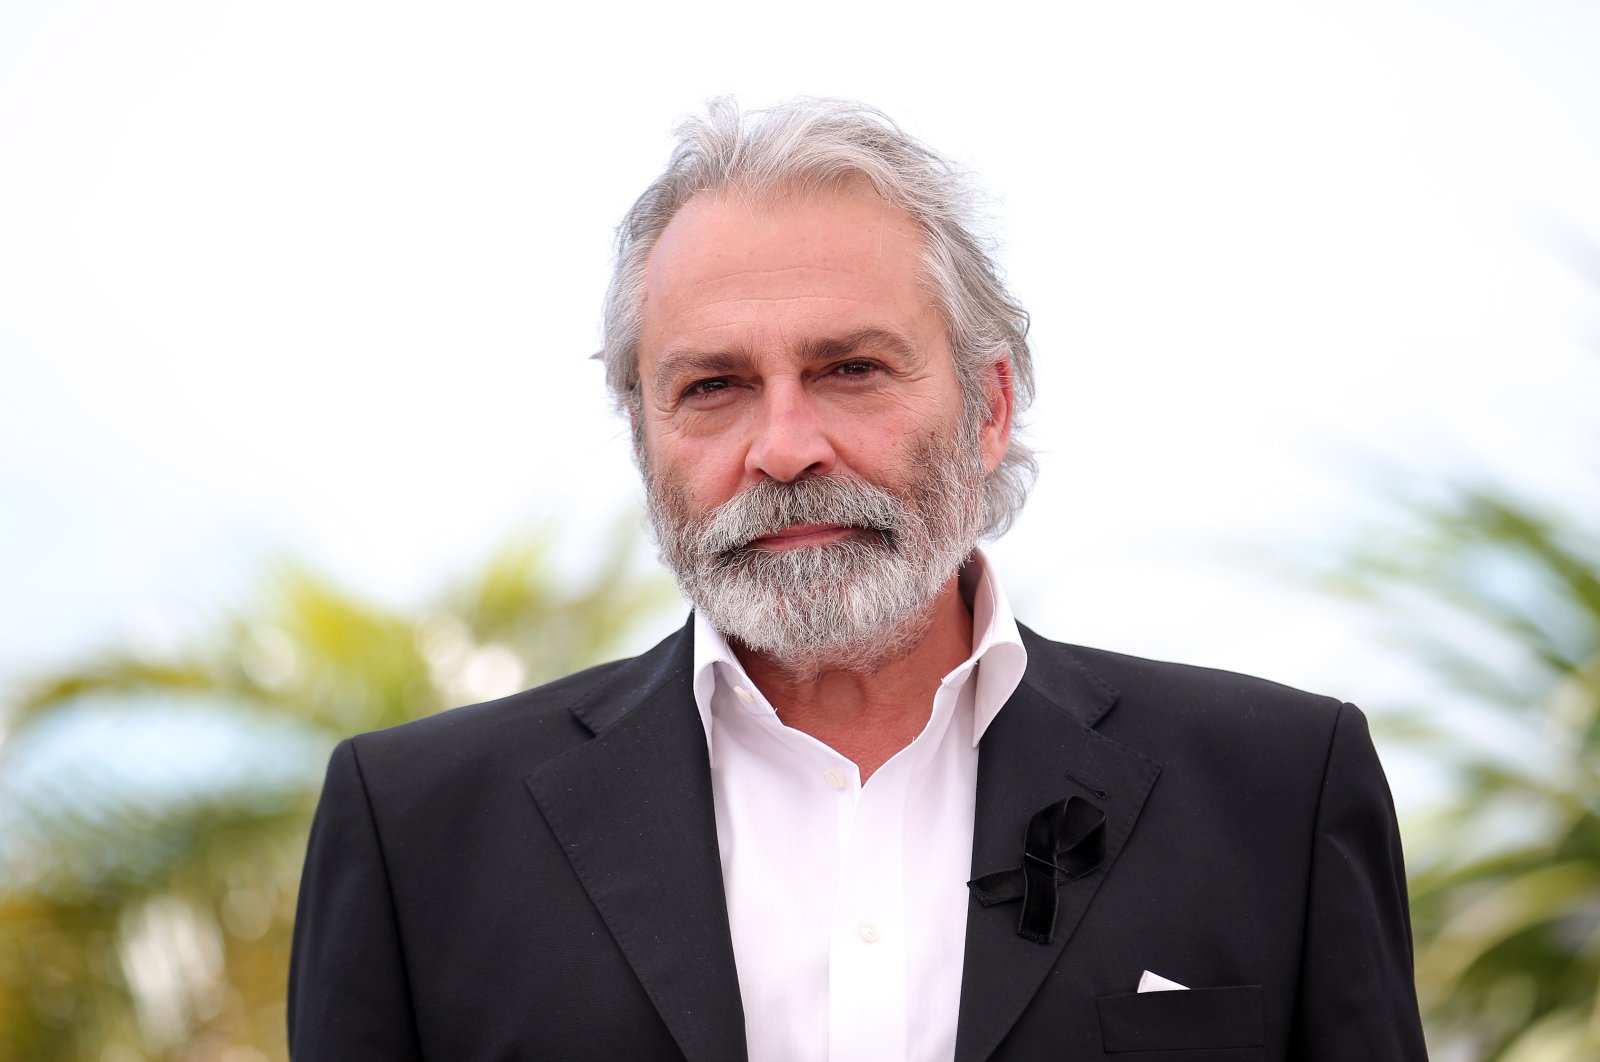 Actor Haluk Bilginer attends the "Winter Sleep" photocall at the 67th Annual Cannes Film Festival on May 16, 2014 in Cannes, France.  (Getty Images)